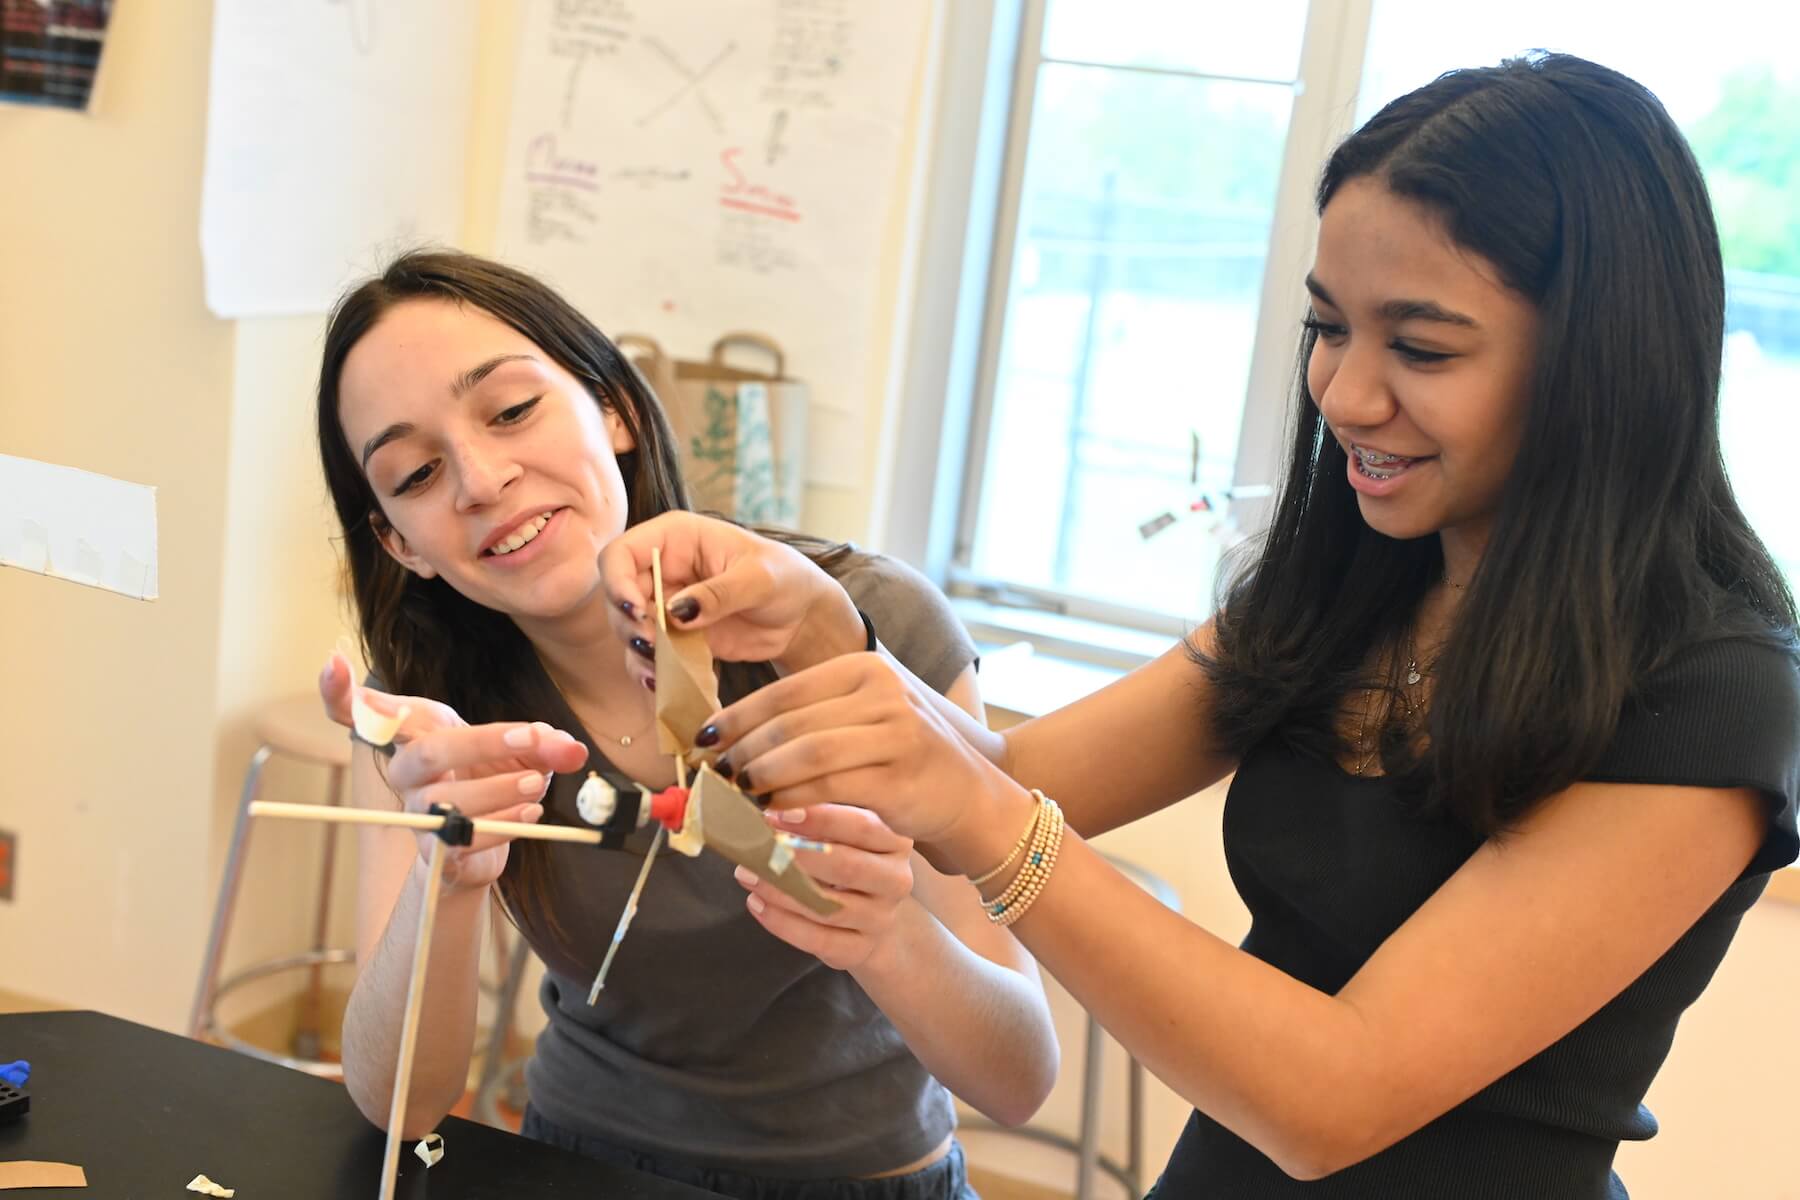 Ethical Culture Fieldston School Middle School students work together to build a wind powered experiment